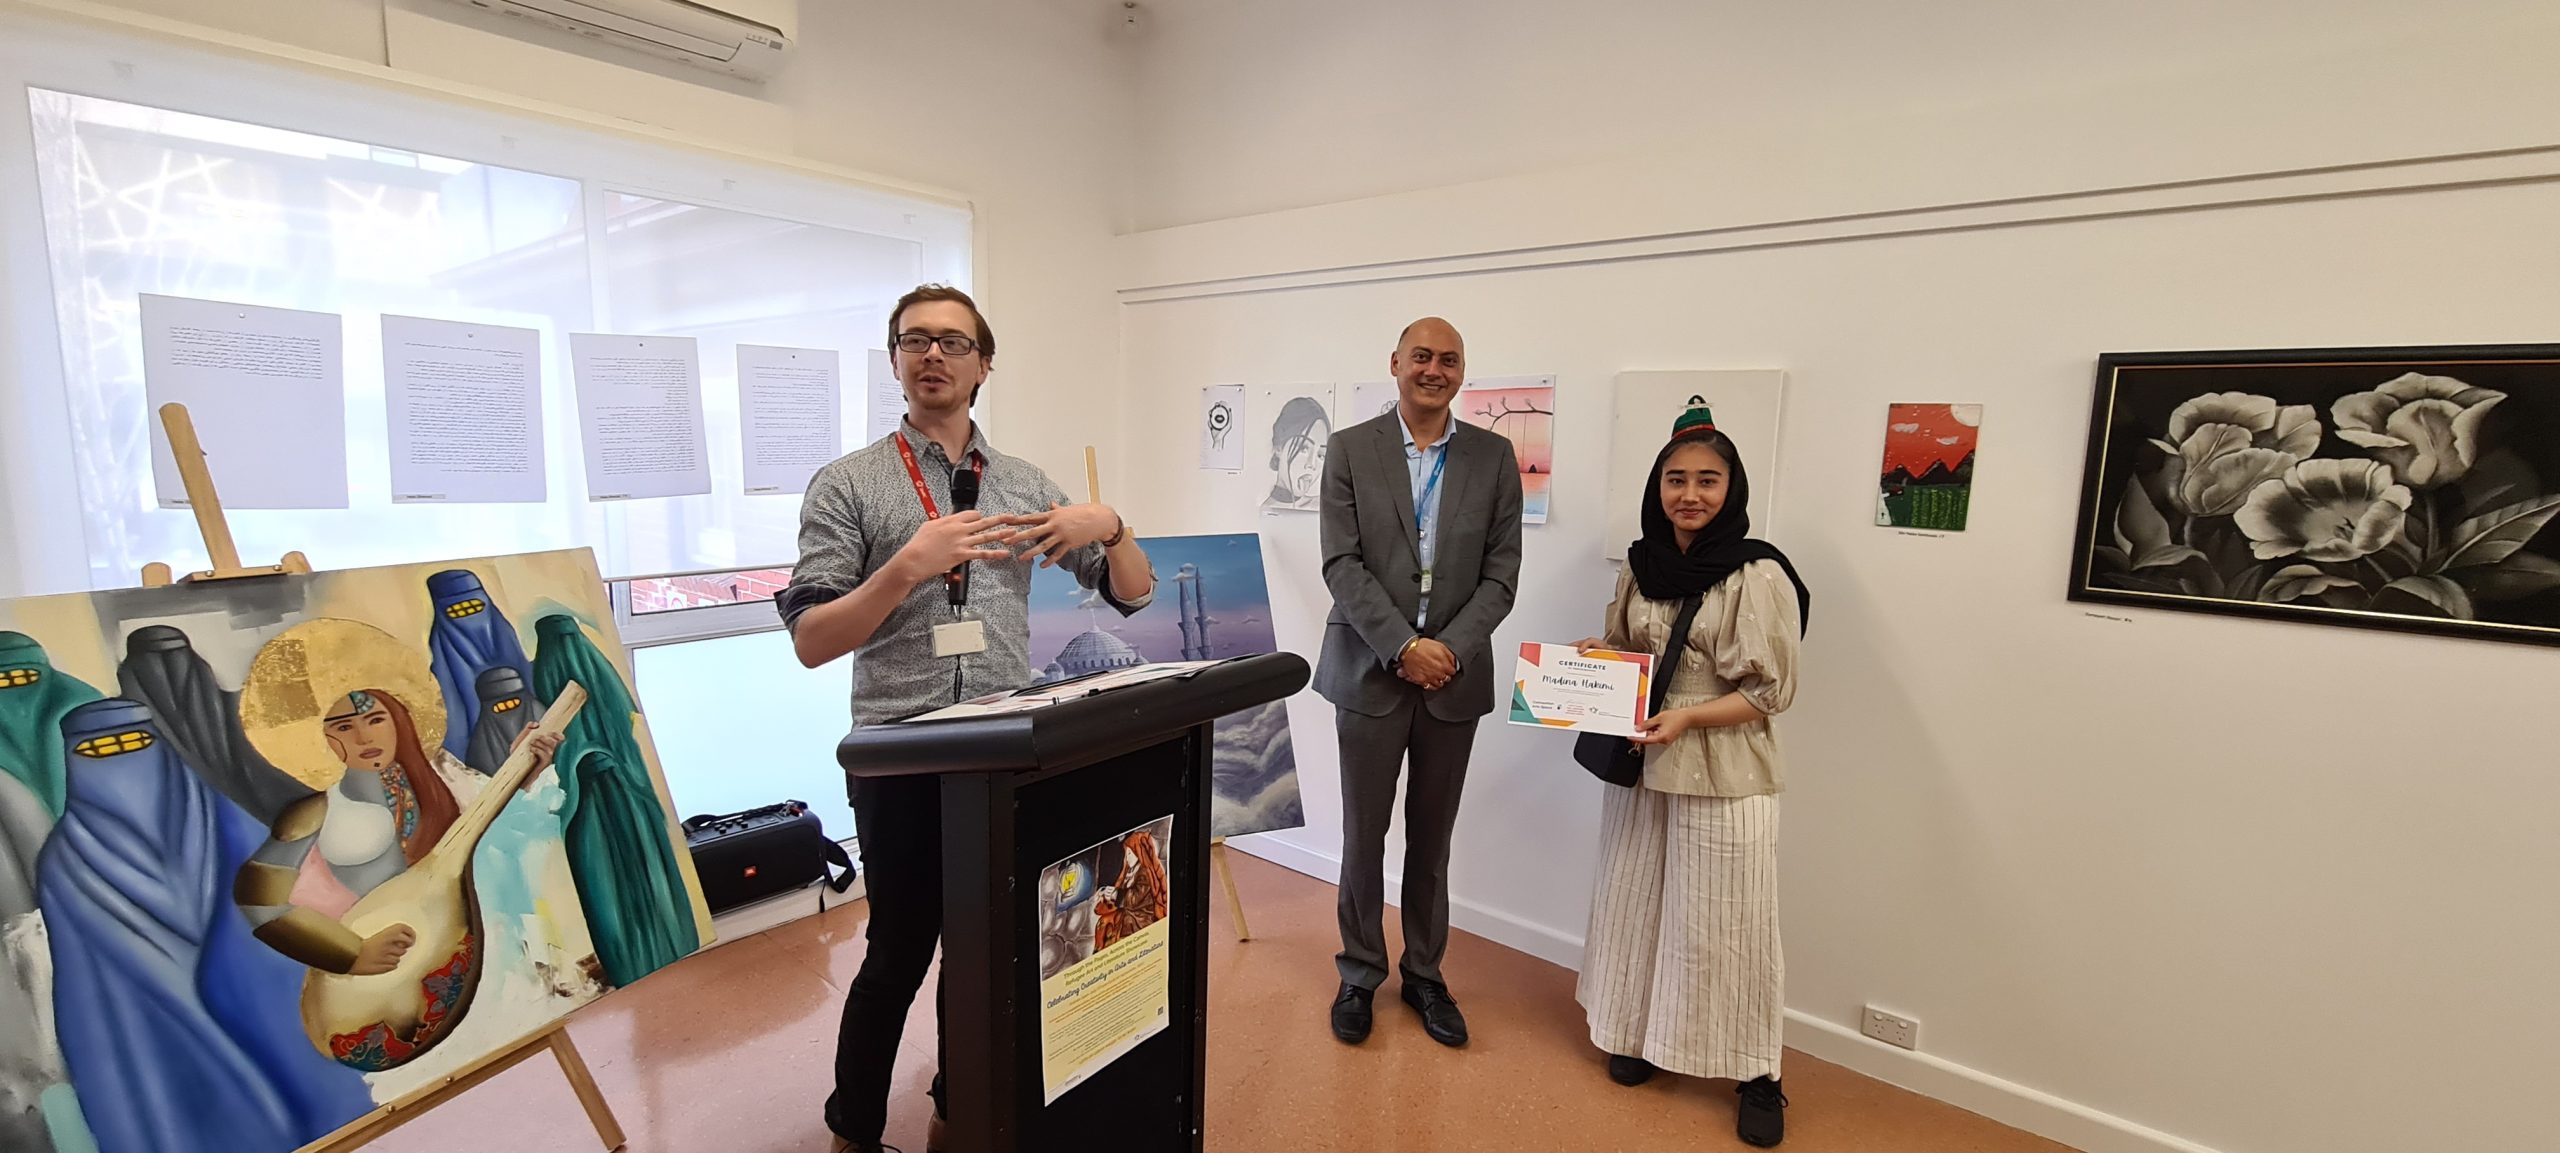 Refugee Youth Arts and Literature Competition showcases young local talent